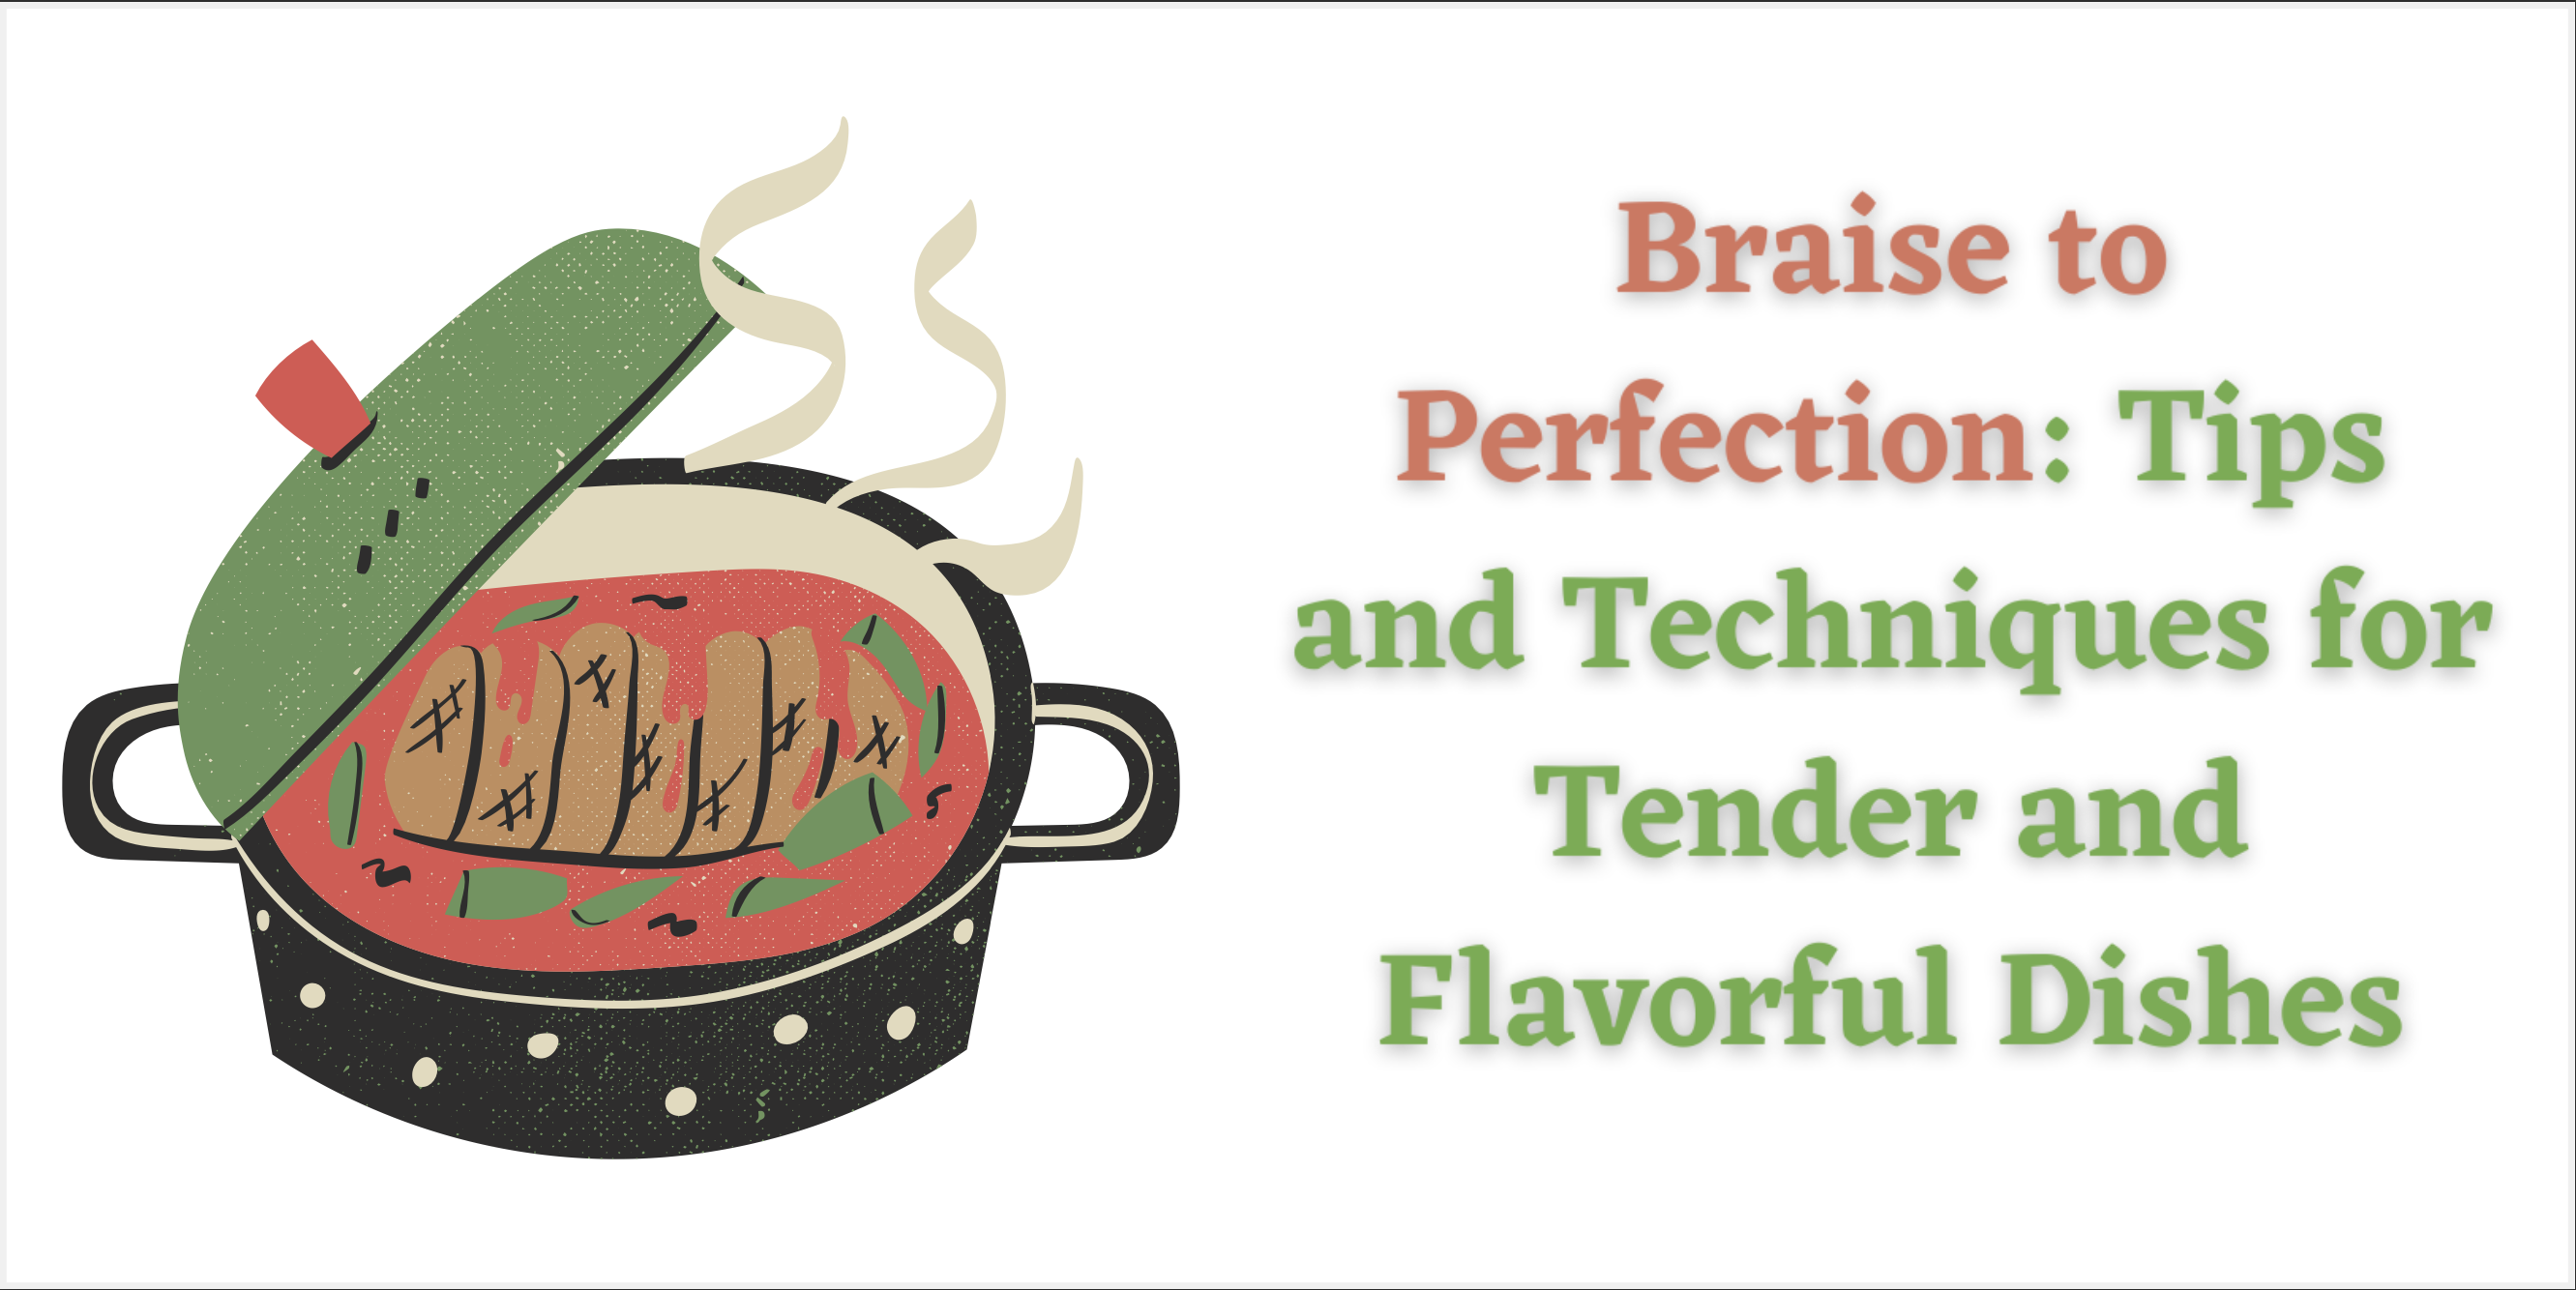 Braise to Perfection: Tips and Techniques for Tender and Flavorful Dishes